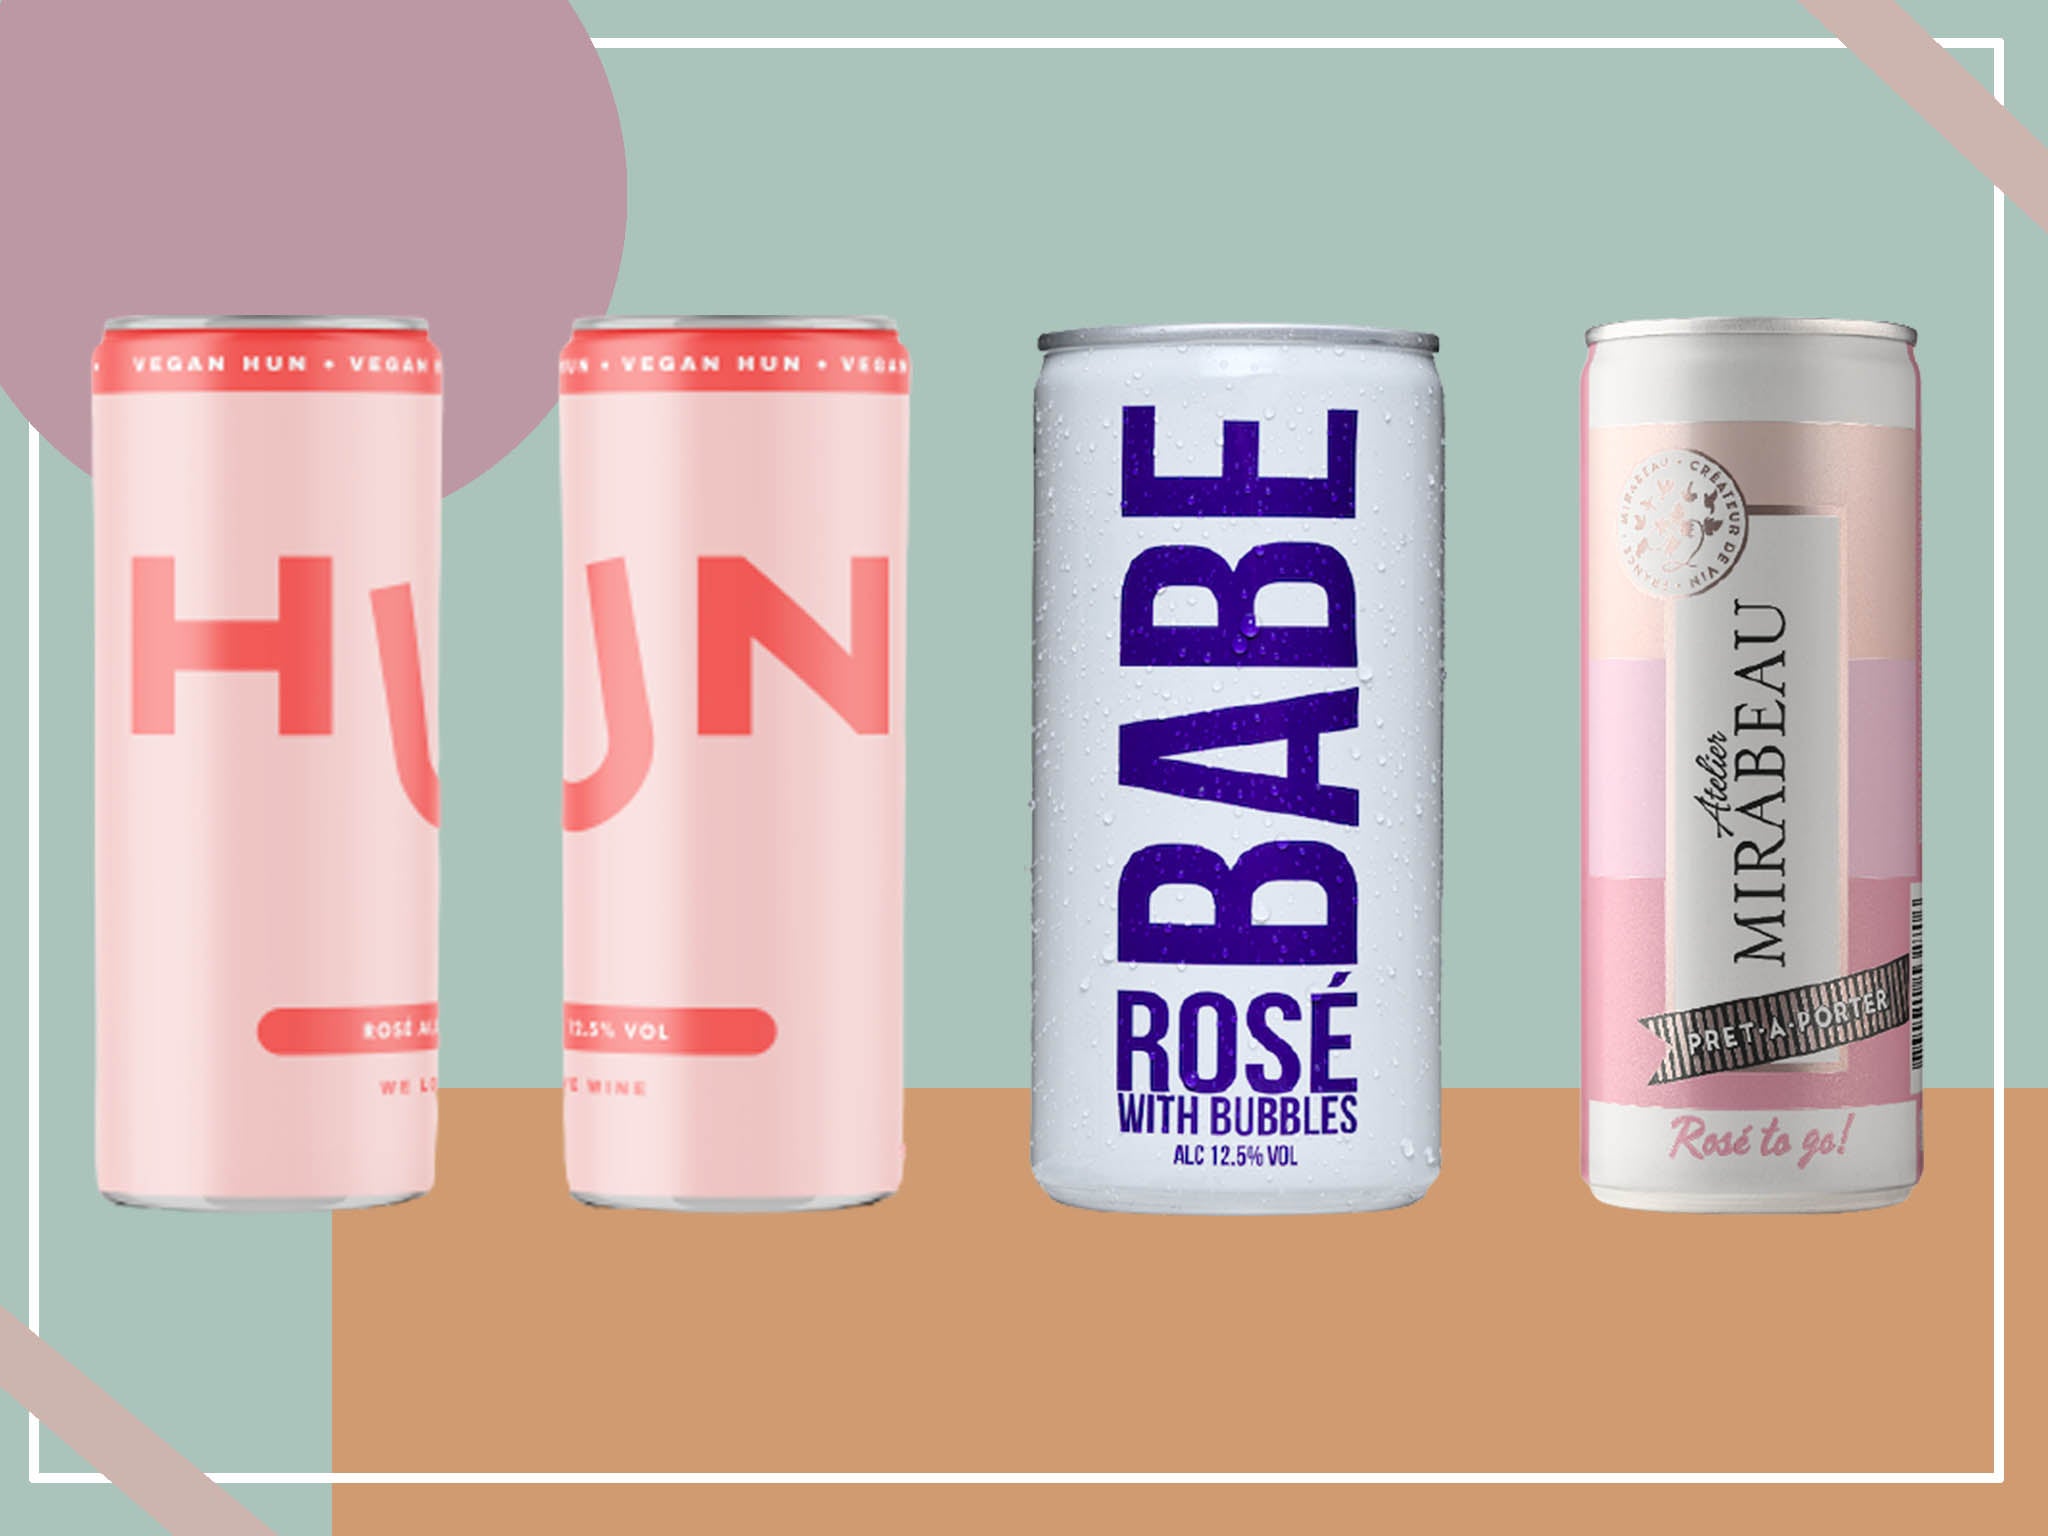 White or rosé, sparkling or still, the pros for these are clear: portability and a safeer alternative to glass while in public